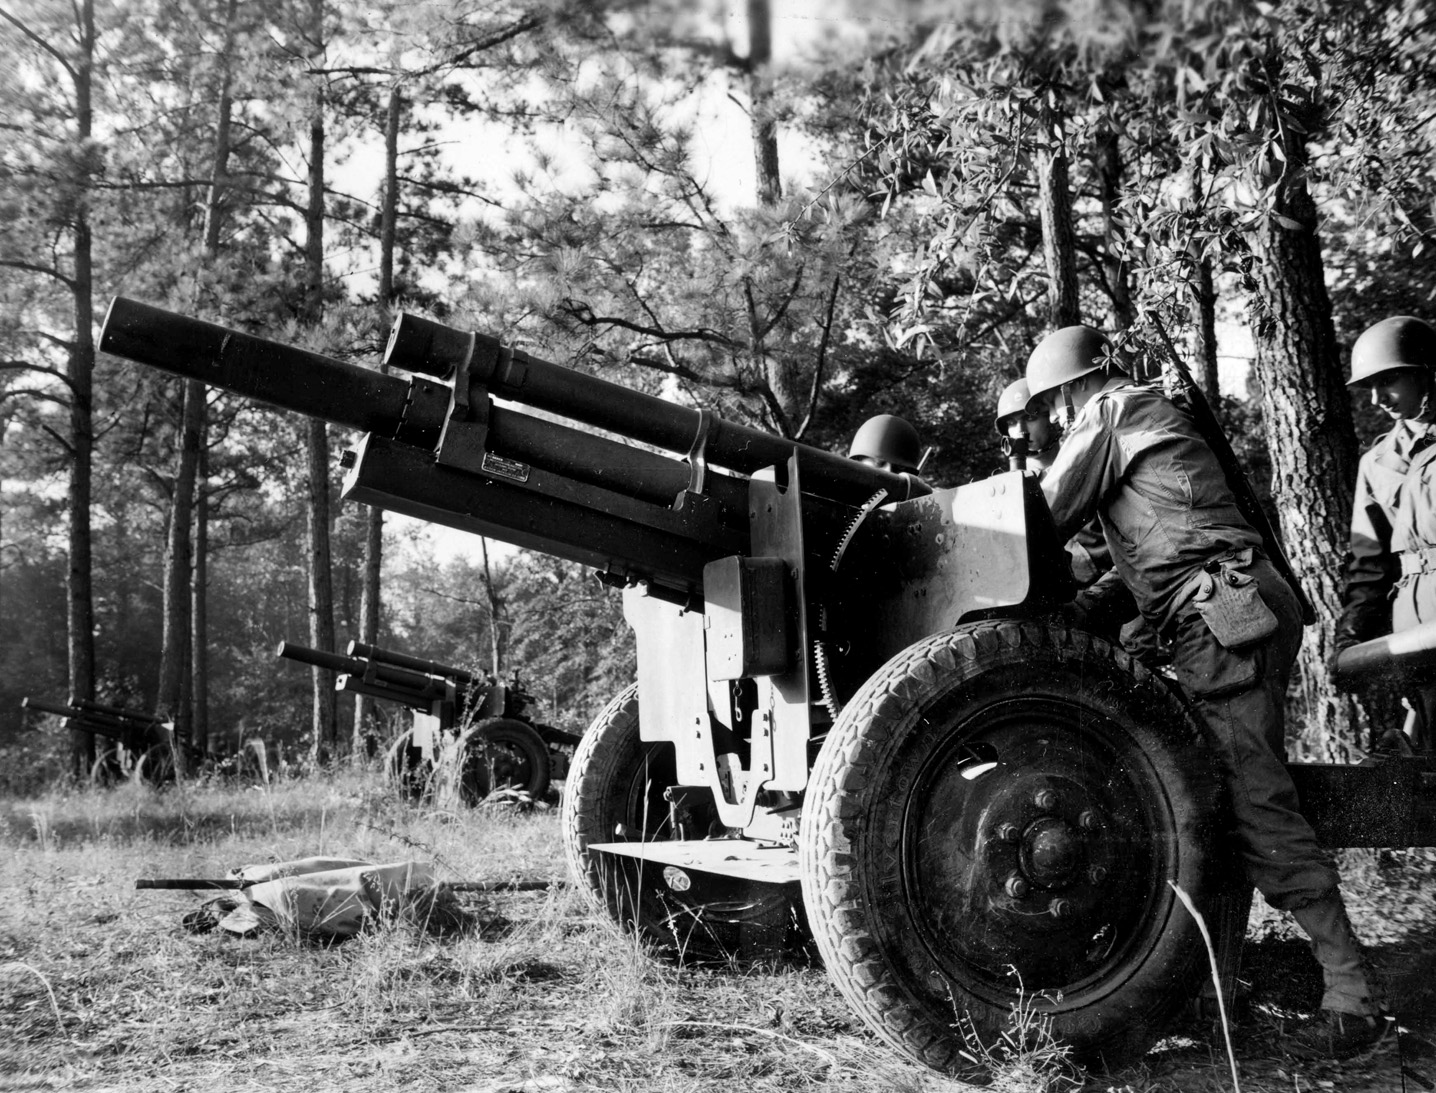 A 105mm howitzer of the U.S. Army is serviced during training exercises. The field artillery pieces assigned to the 106th Infantry Division during the Battle of the Bulge were difficult to relocate due to the slick roads and wintry conditions.